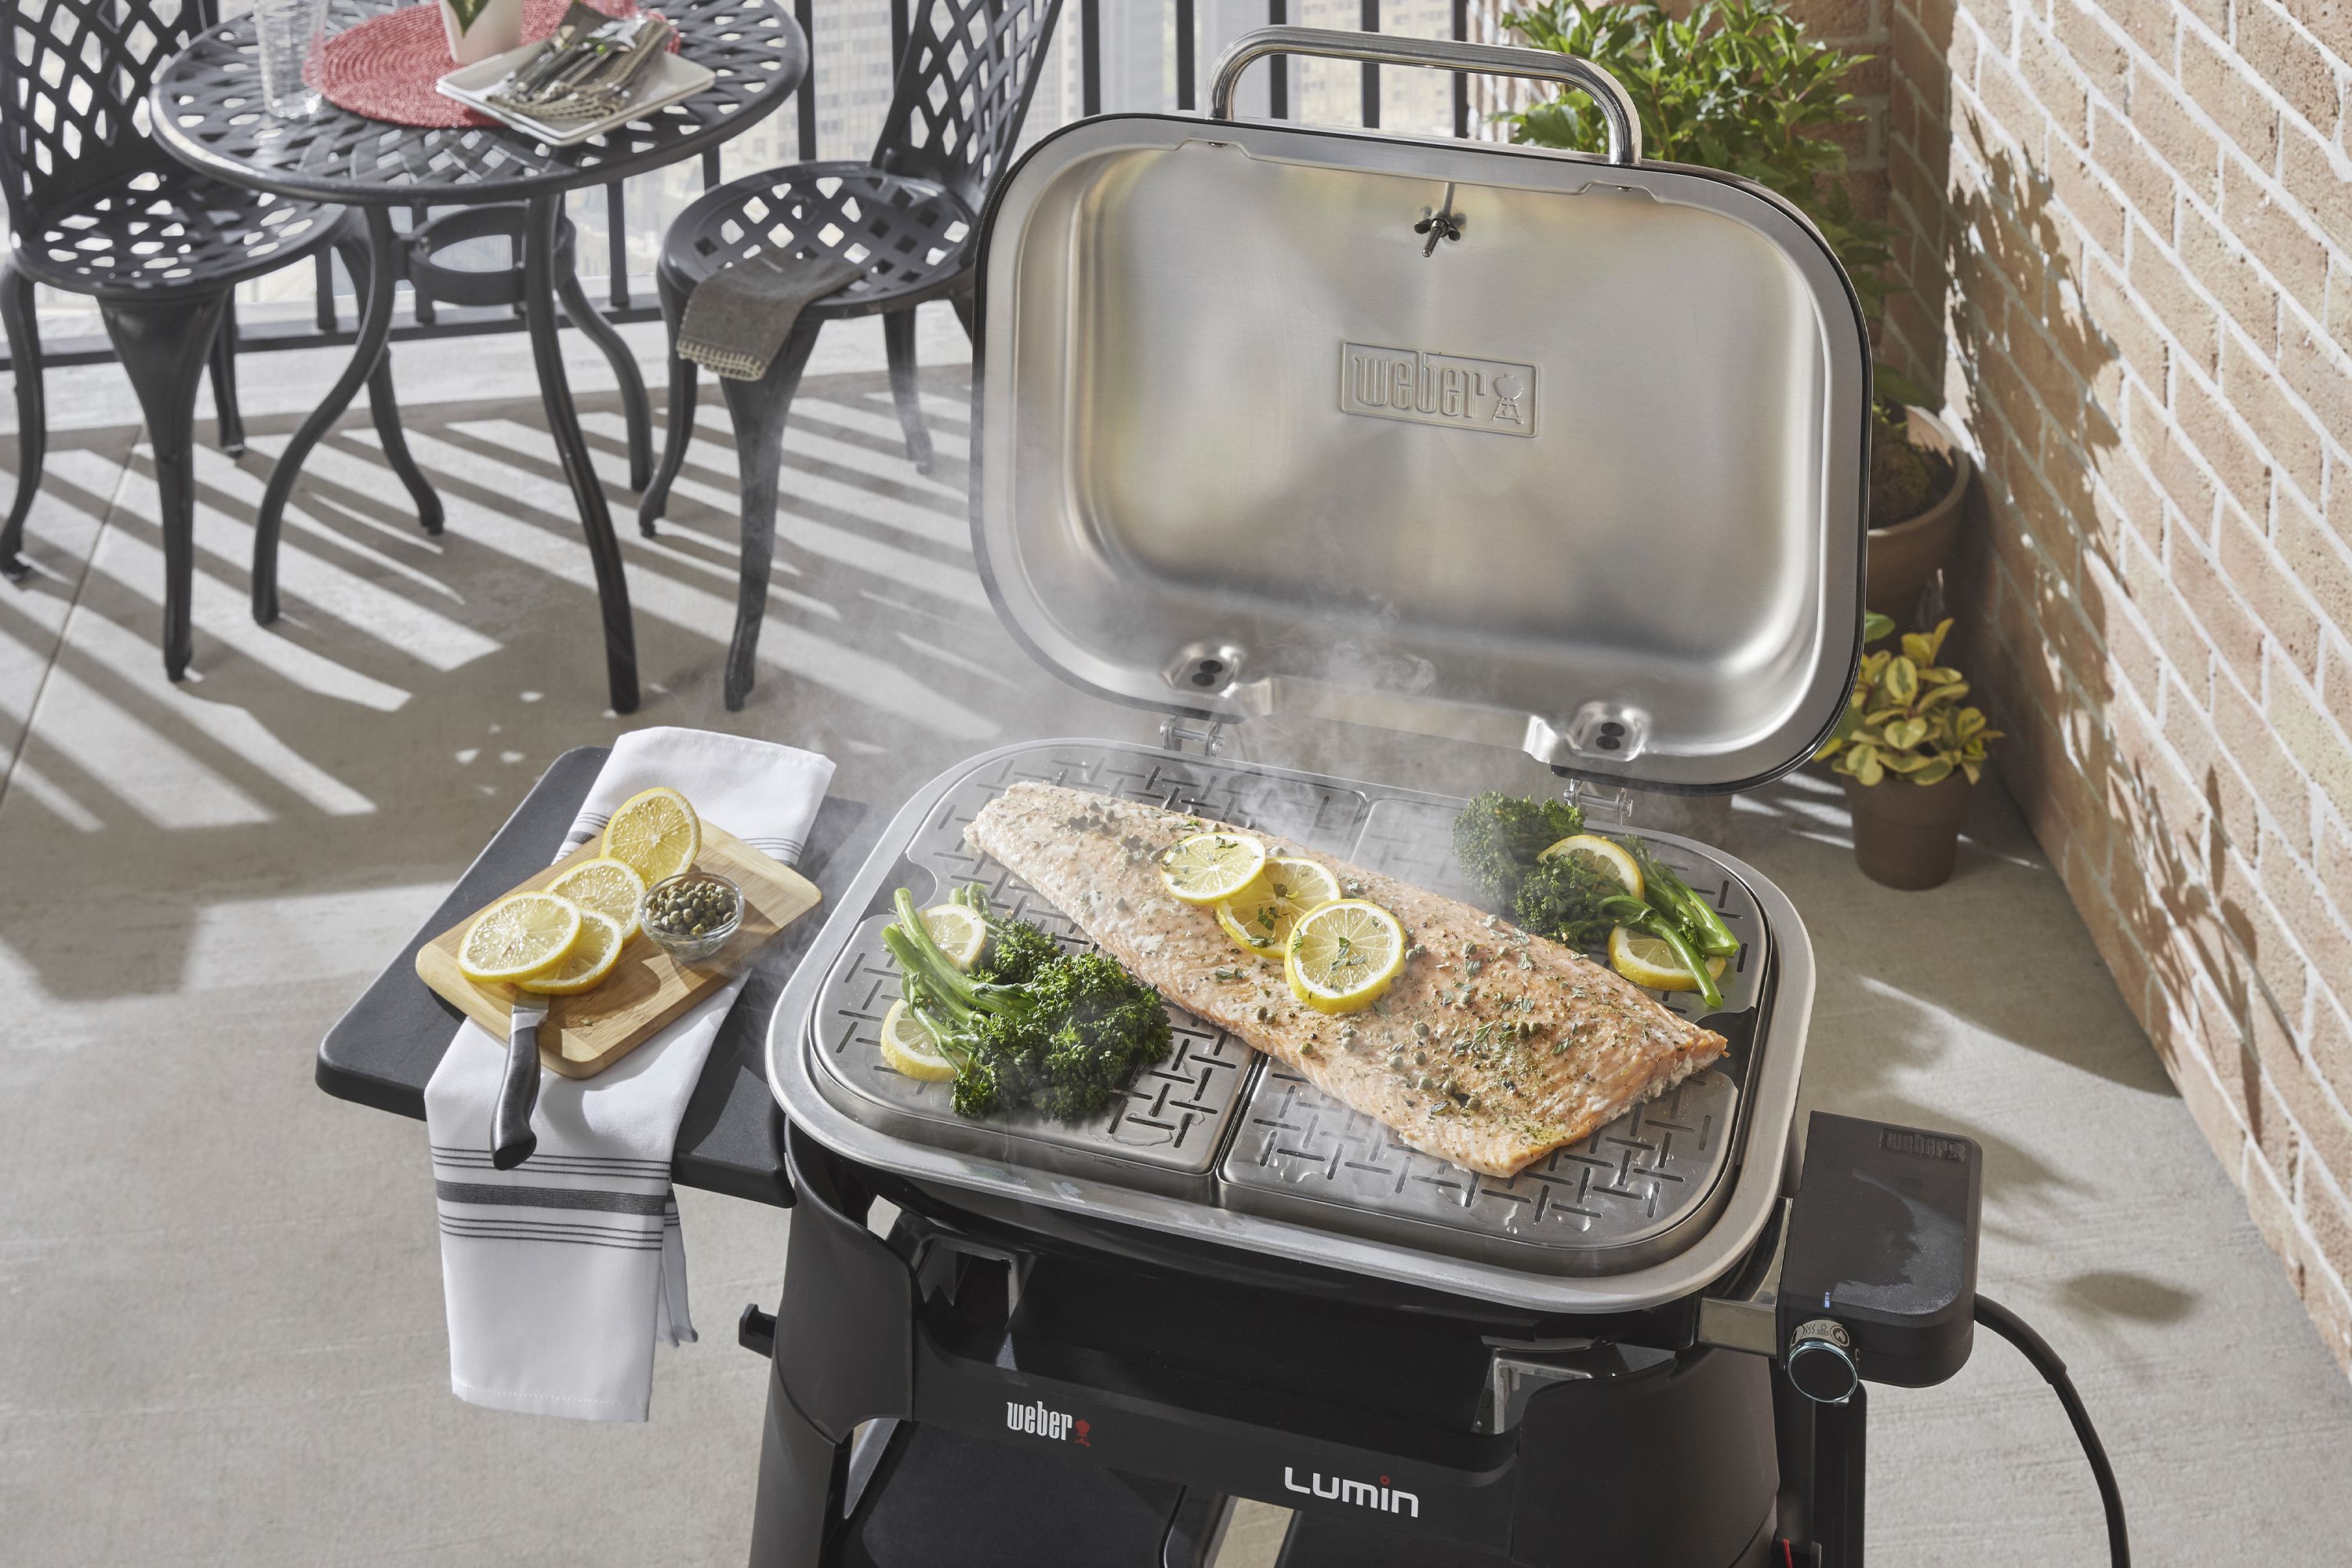 At vise temperament drivhus Weber Wants You to Go Electric with Its New Grill